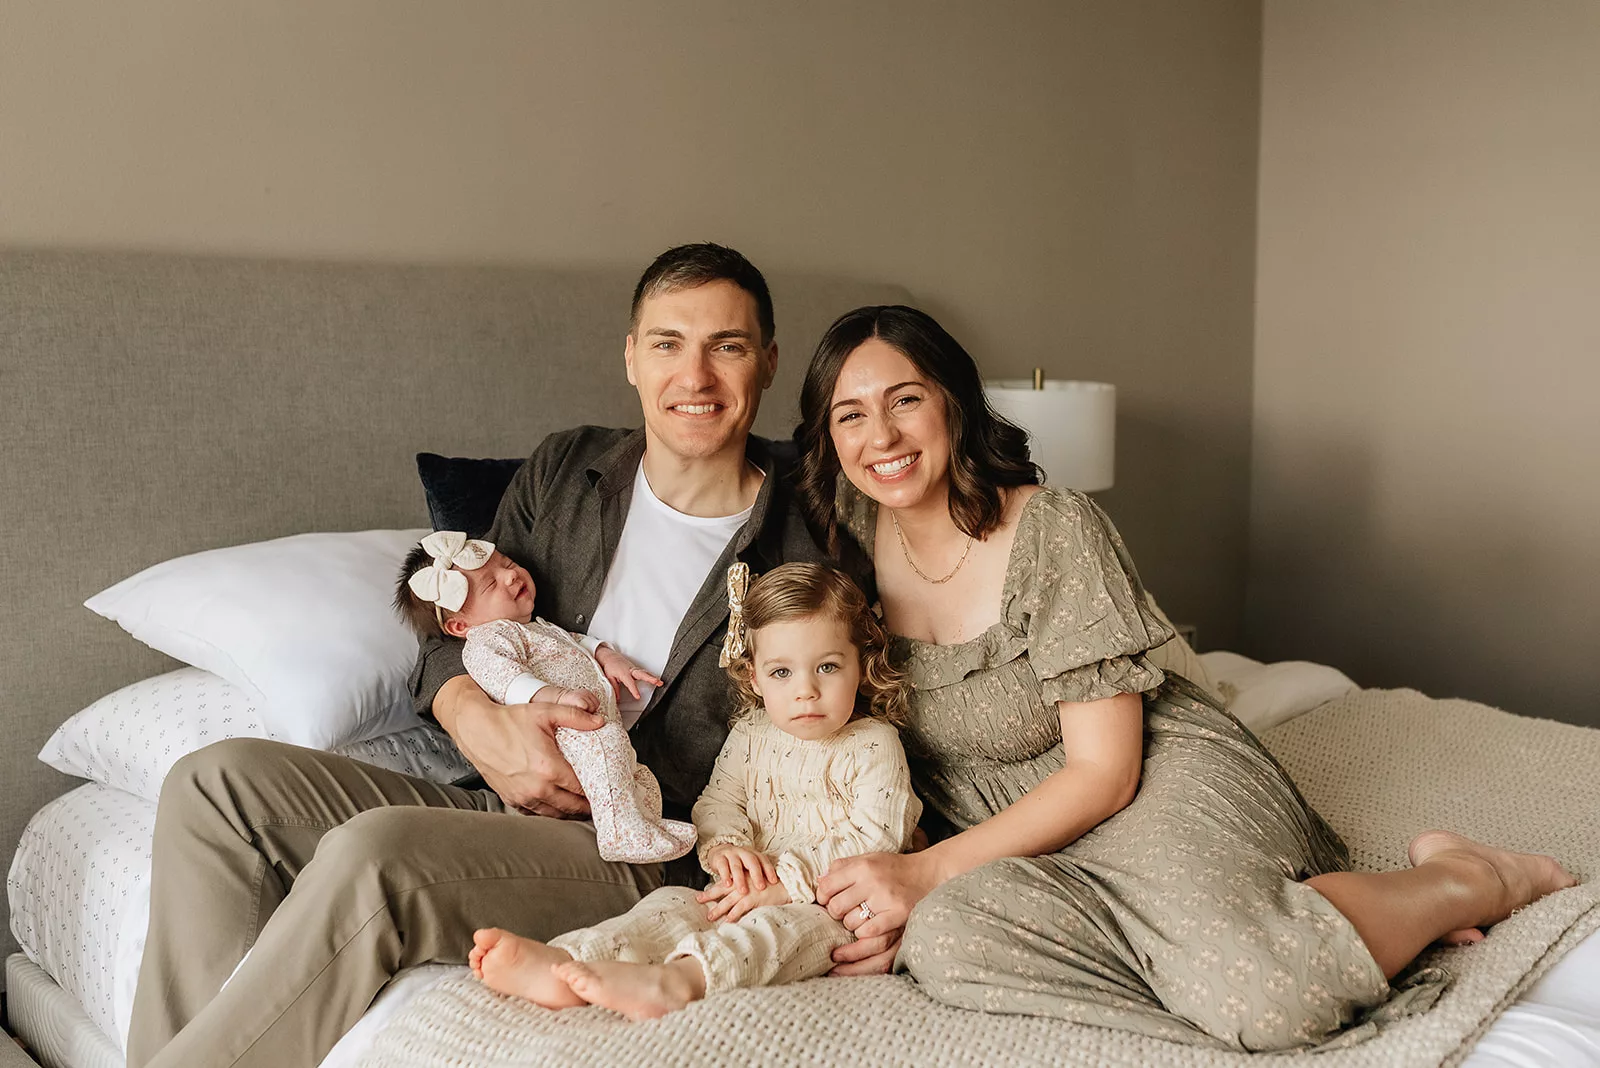 A mom and dad sit on a bed with their newborn baby and young toddler daughter